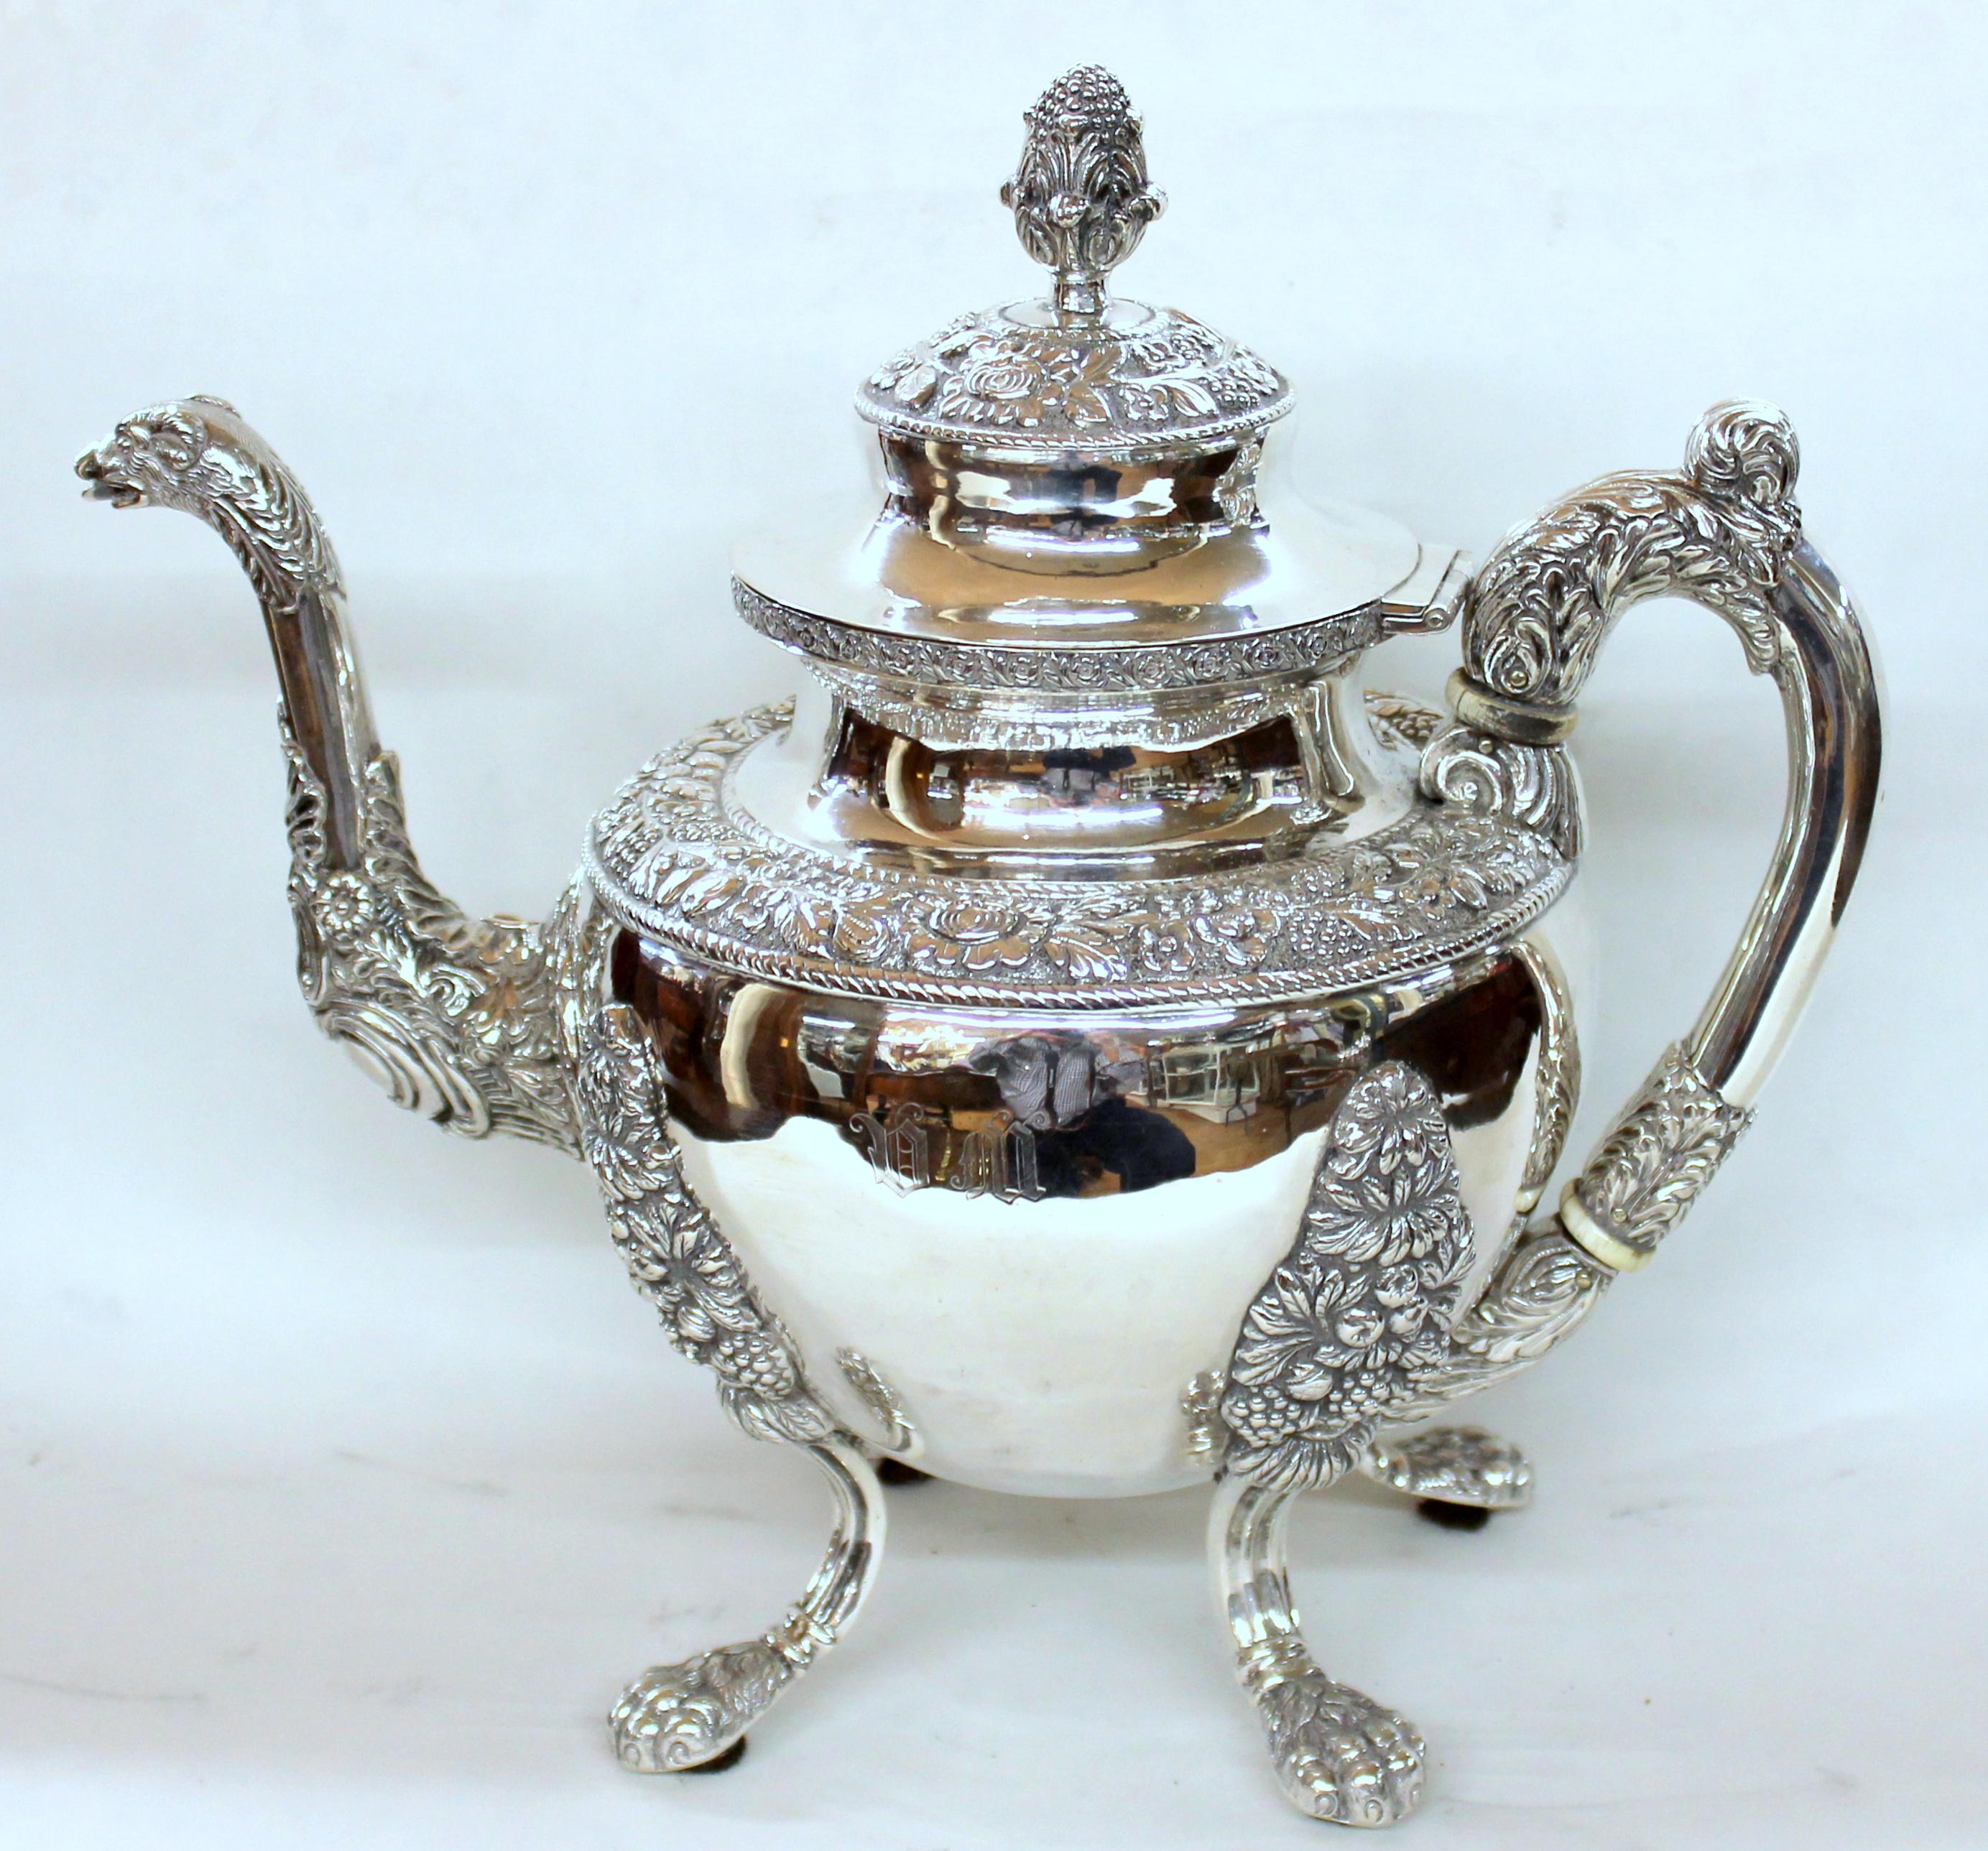 Rare and important antique American very heavyweight coin silver (.900 fine) rococo style four piece tea set including exceptional teapot, two handled covered sugar bowl, cream jug and waste bowl.

Maker: Andrew de Milt, New York

Please note the